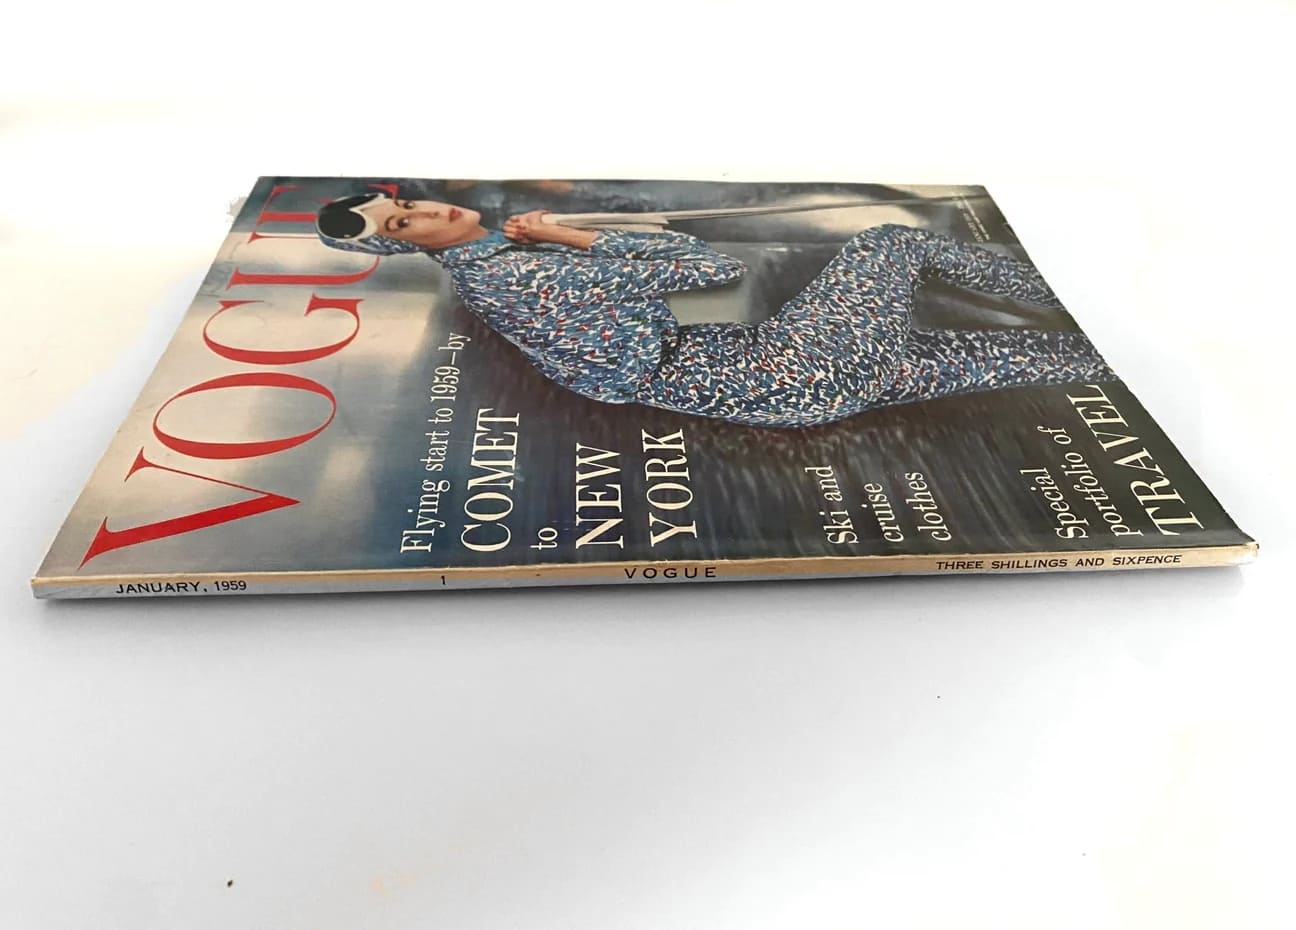 1959 VOGUE Magazine "Comet to New York" - Emilio Pucci - style - CHNGR